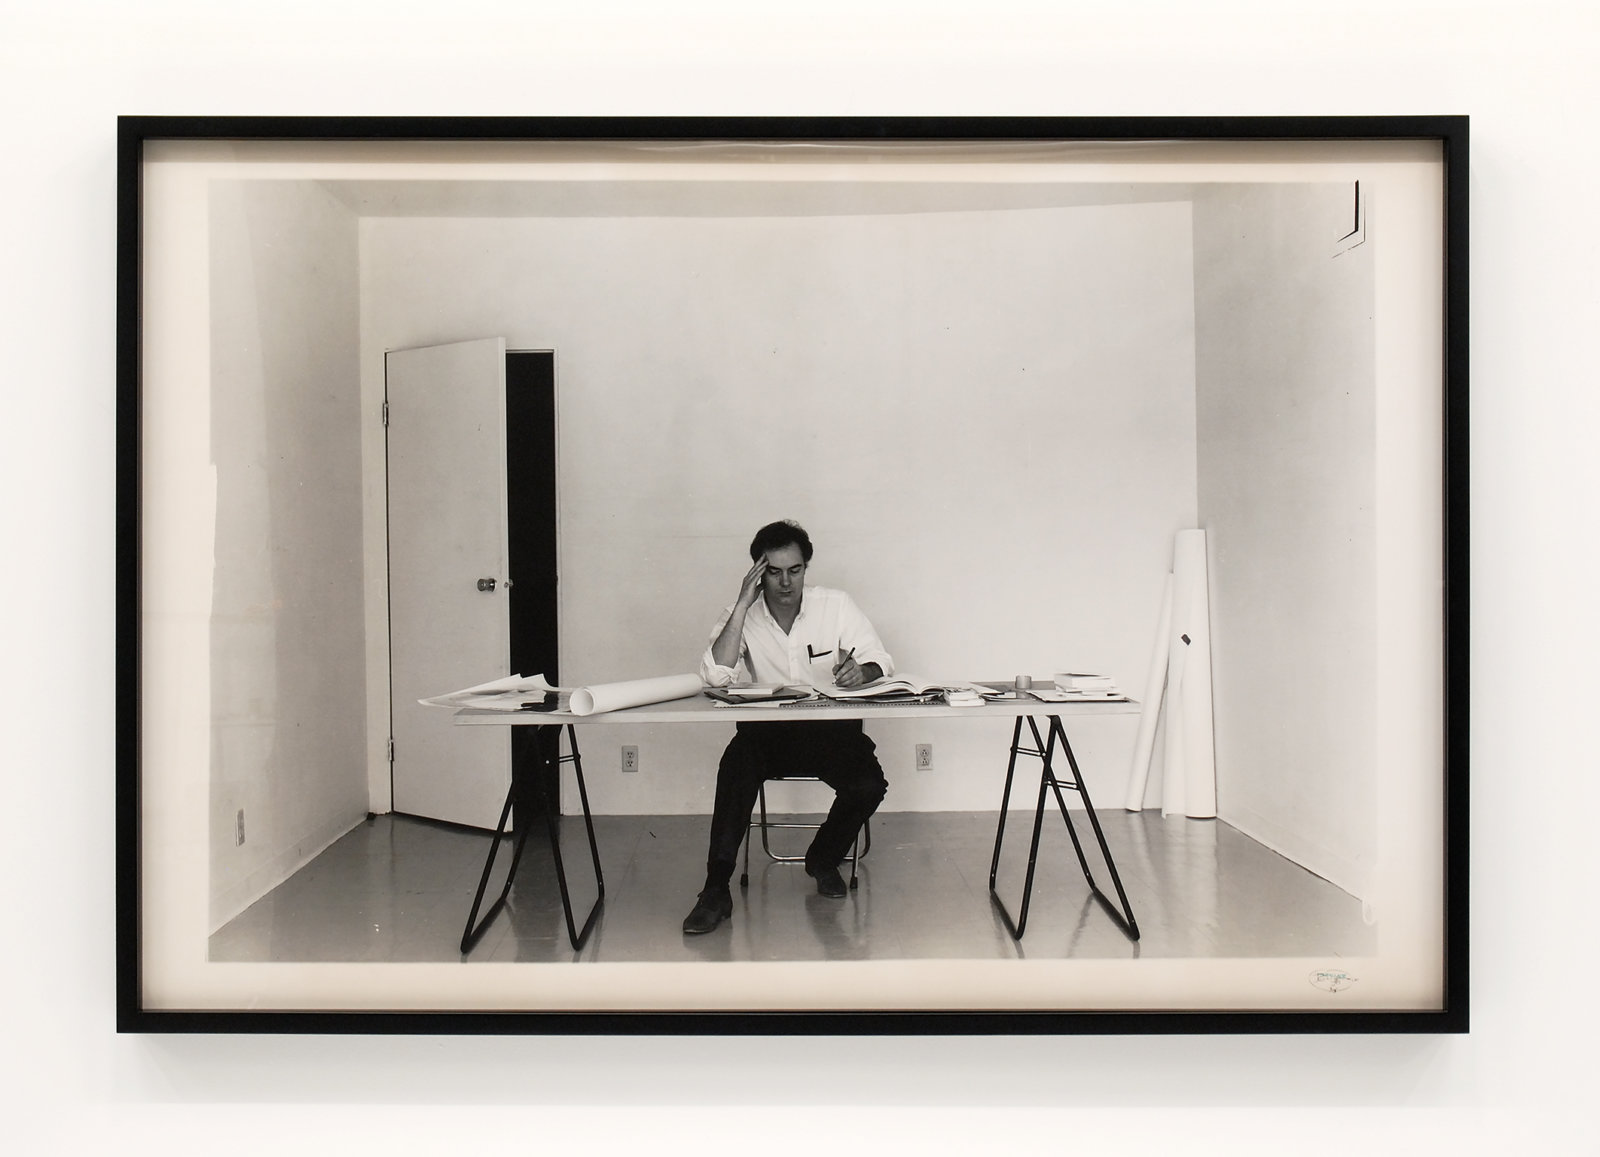 Ian Wallace, At Work 1983, 1983, black and white photograph on RC paper, 42 x 62 in. (107 x 157 cm)